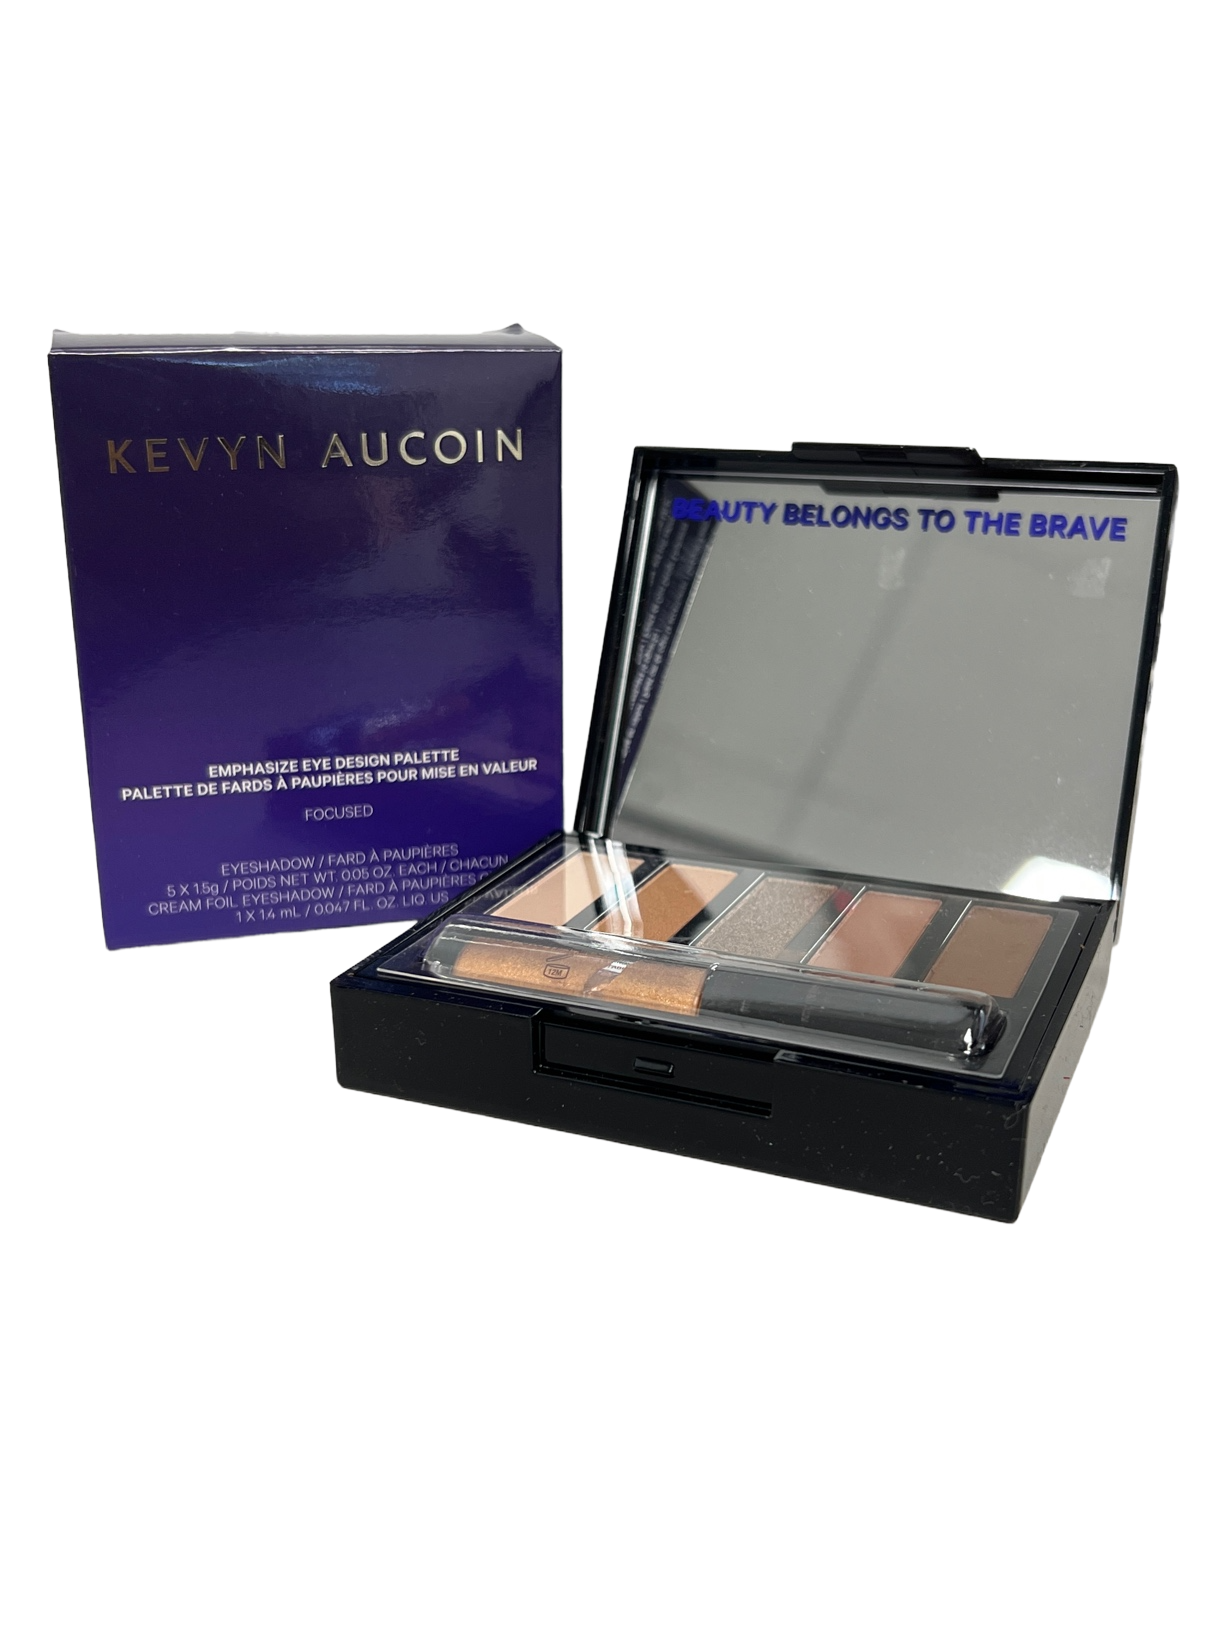 WHOLESALE KEVYN AUCOIN Mix LOT OF 60